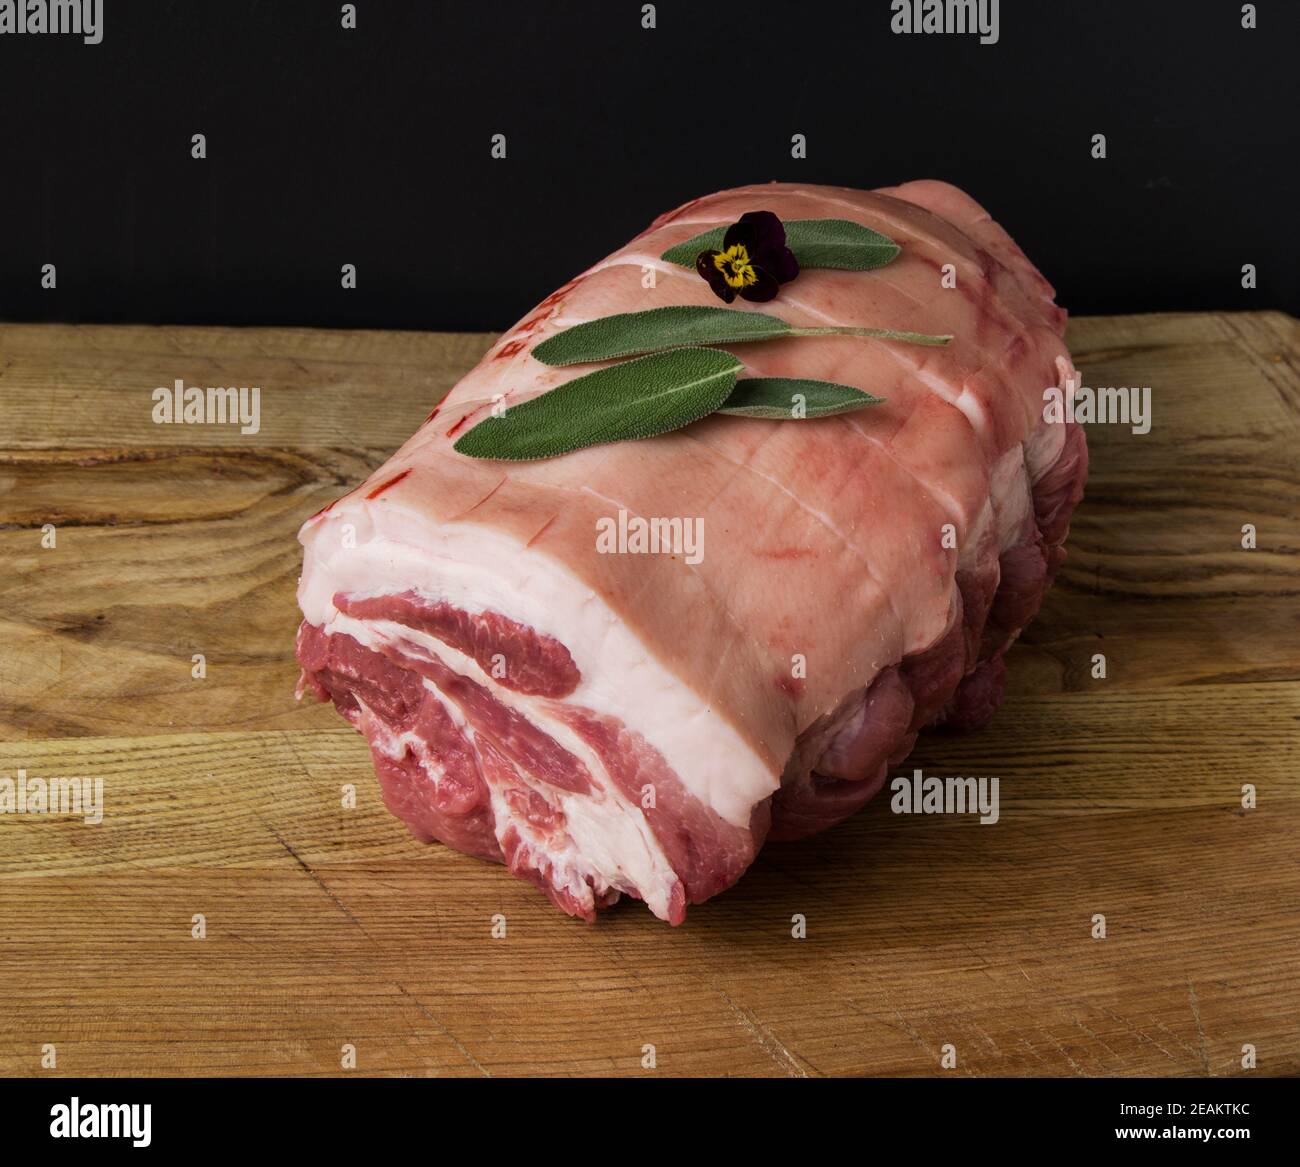 raw pork joint photographed on a wooden cutting board with a black background Stock Photo